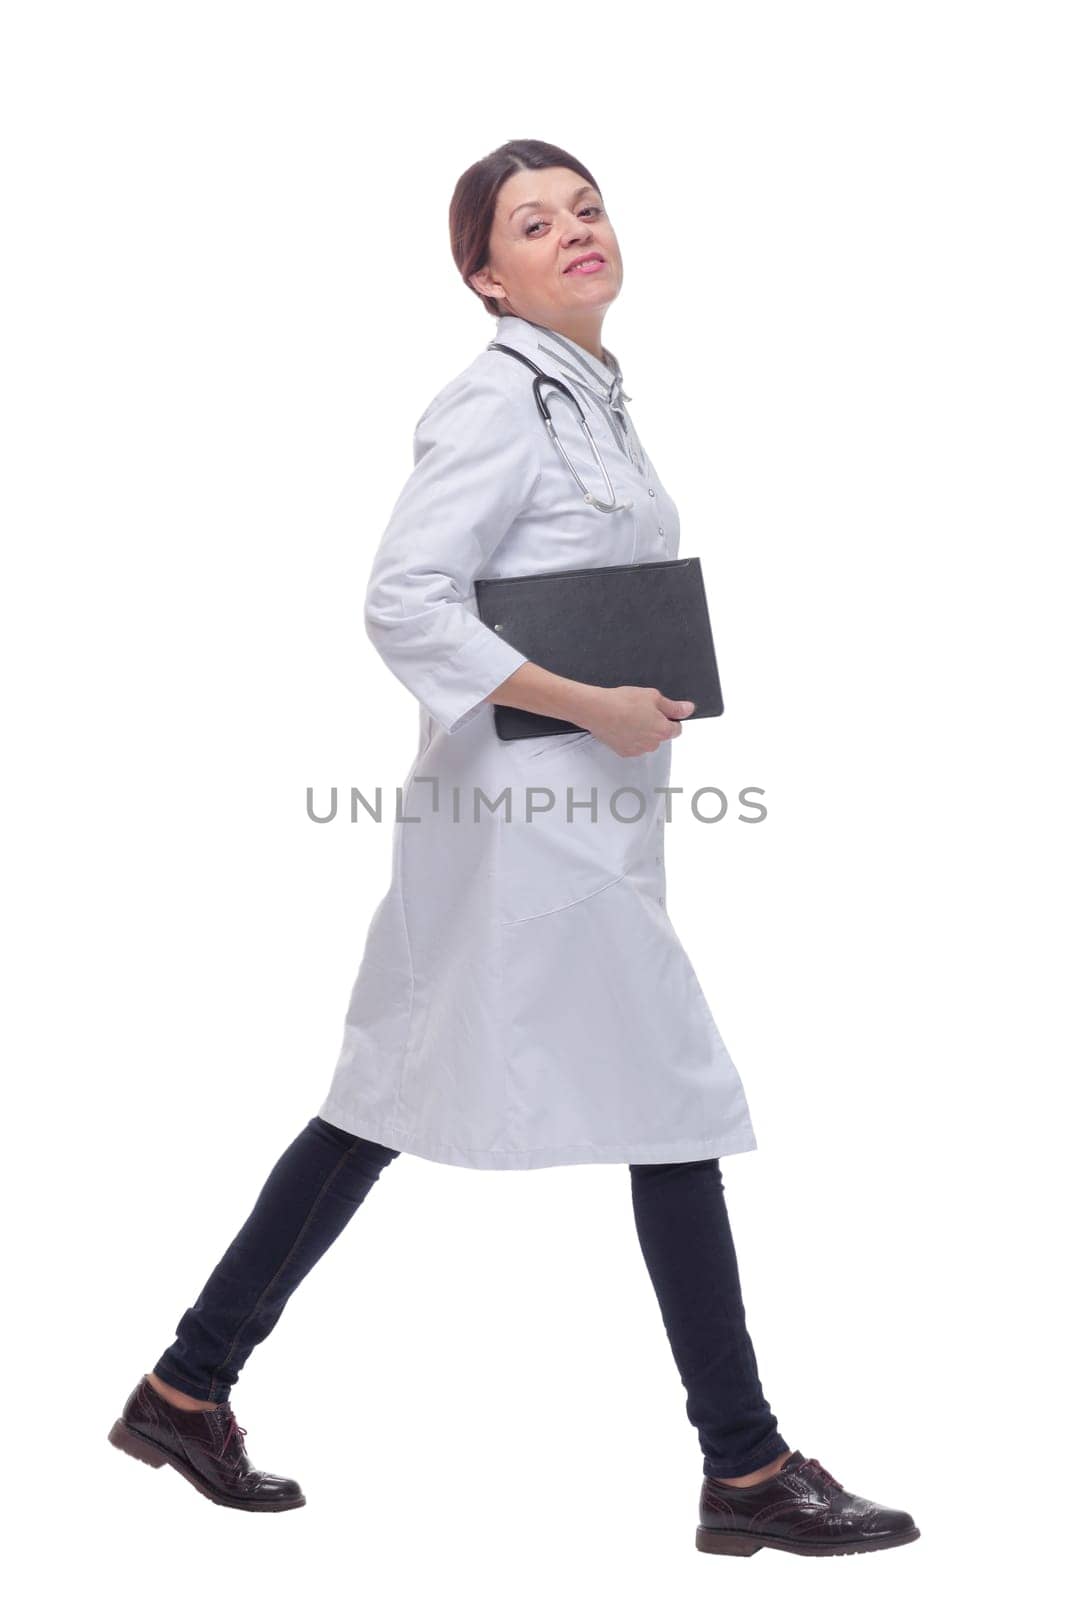 Portrait of female doctor walking towards the camera smiling isolated over a white background